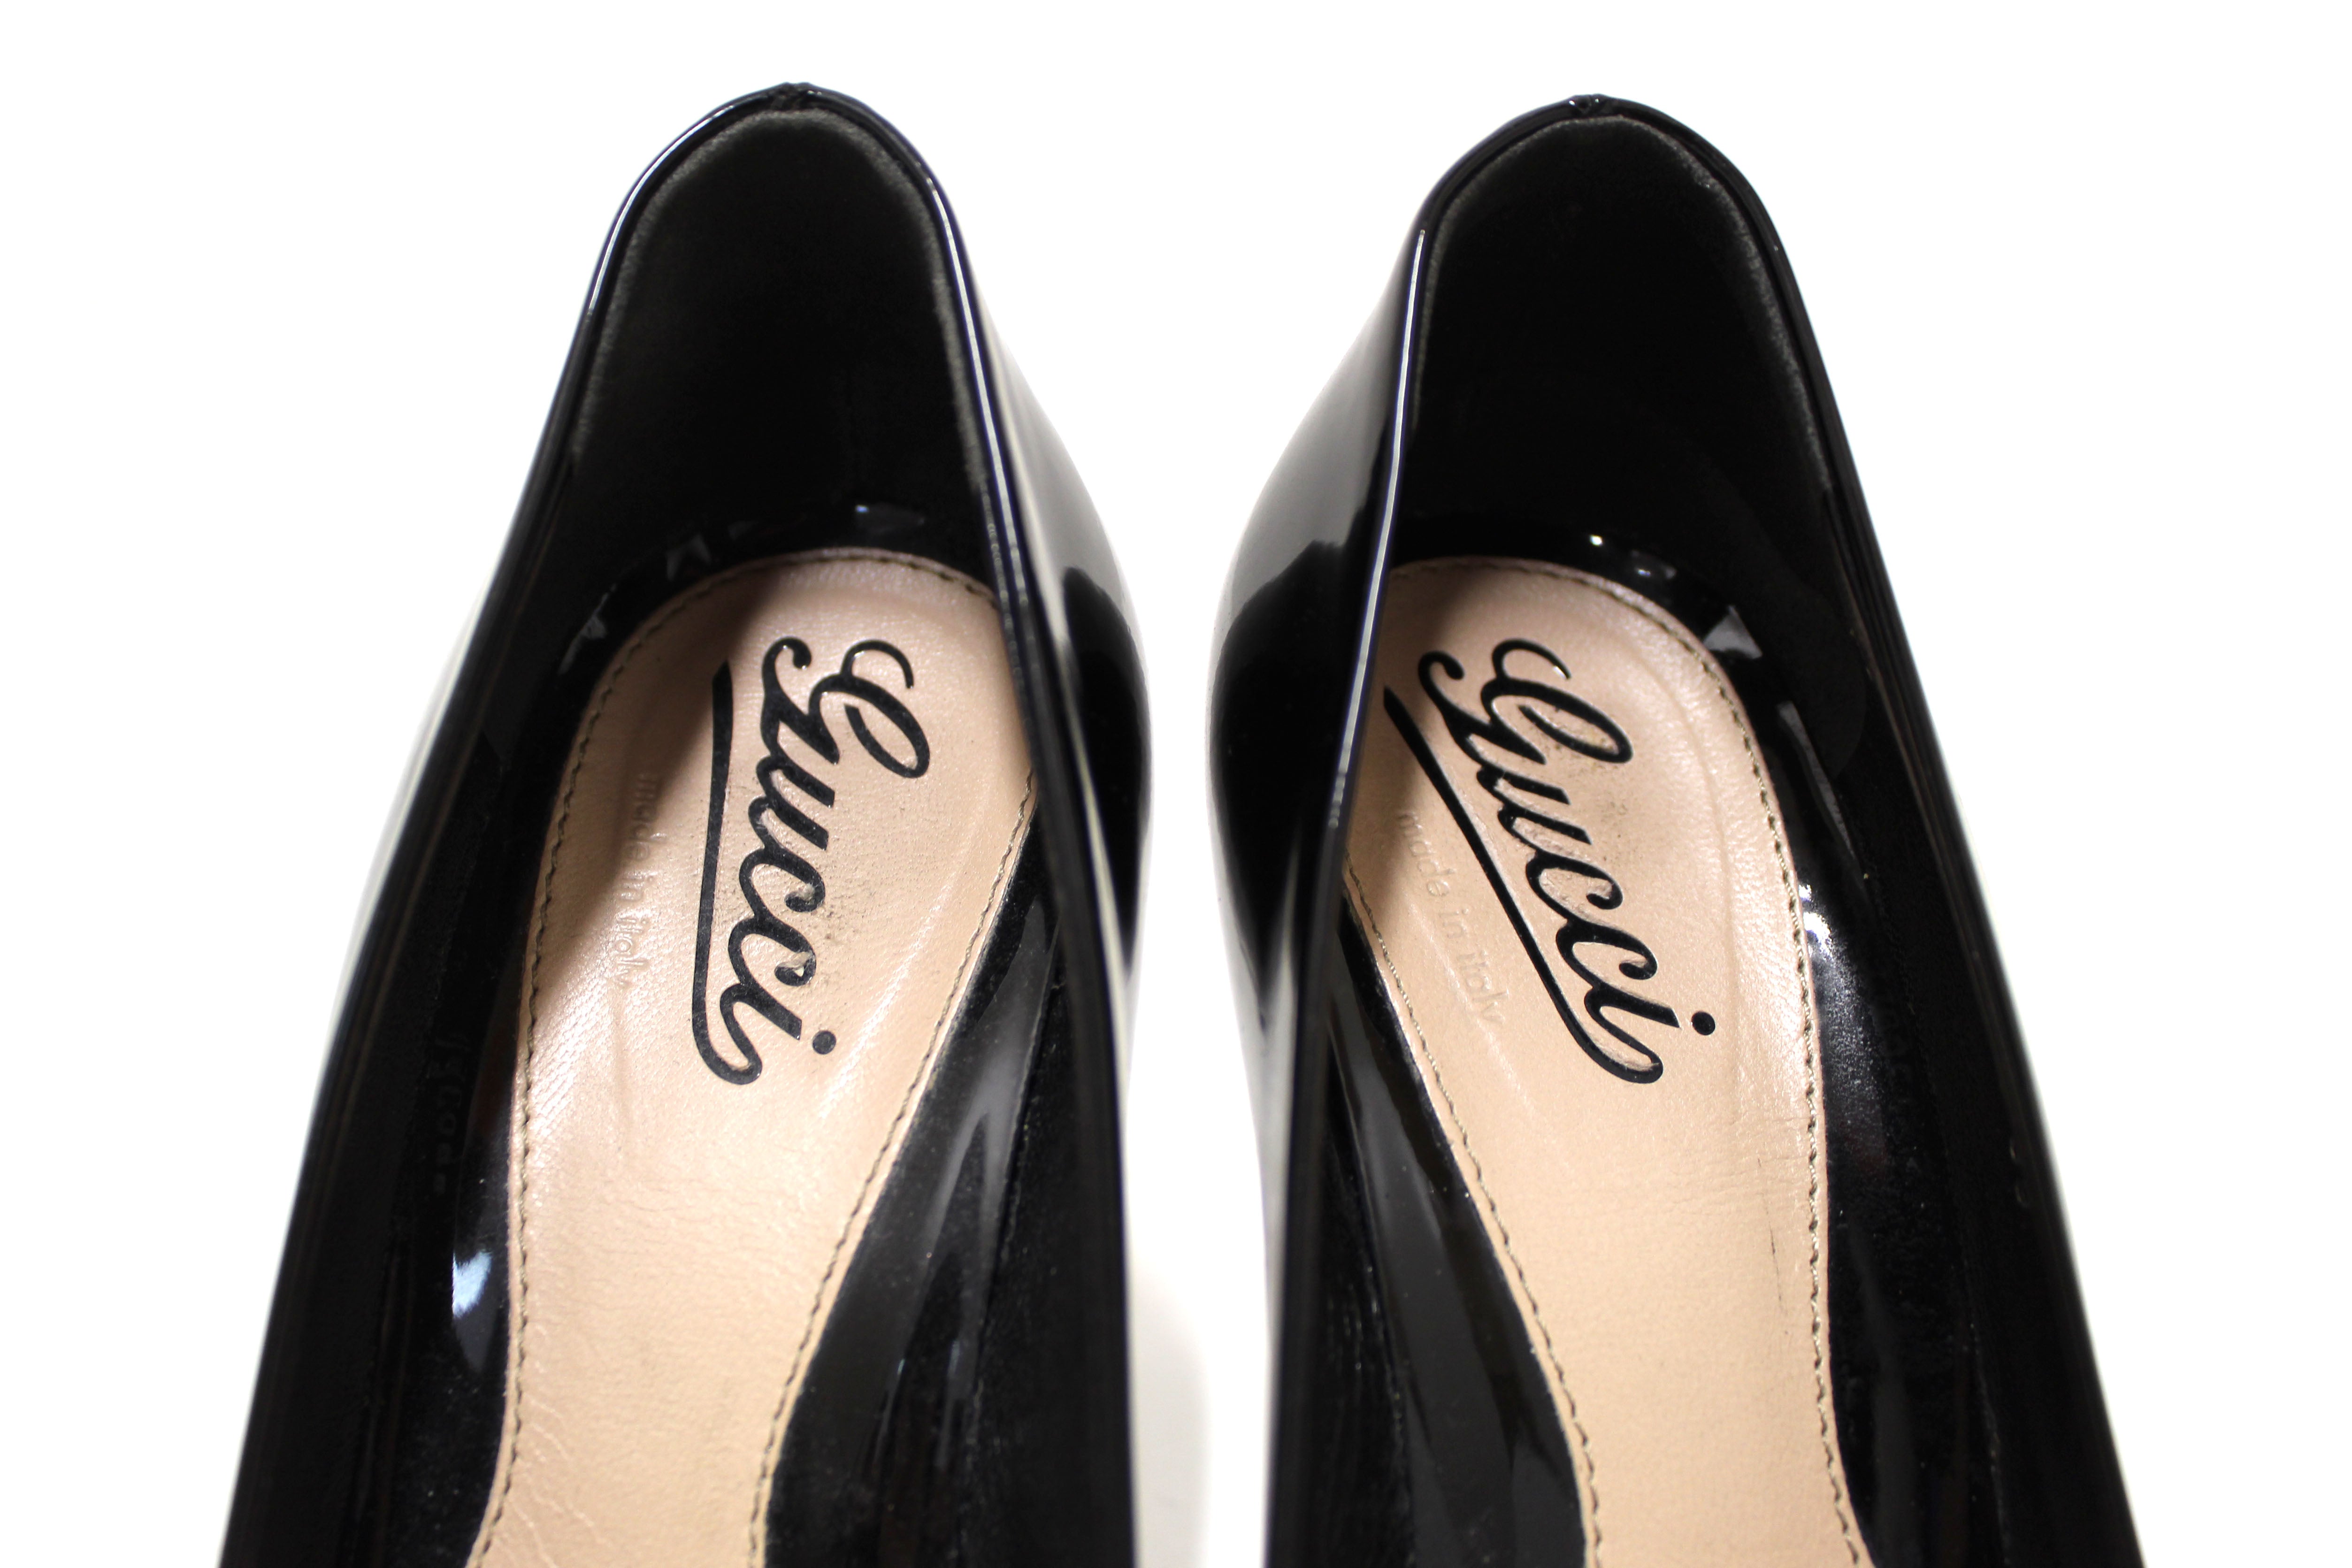 Authentic Gucci Black Patent Leather and White Rubber Pumps Heels Size 39